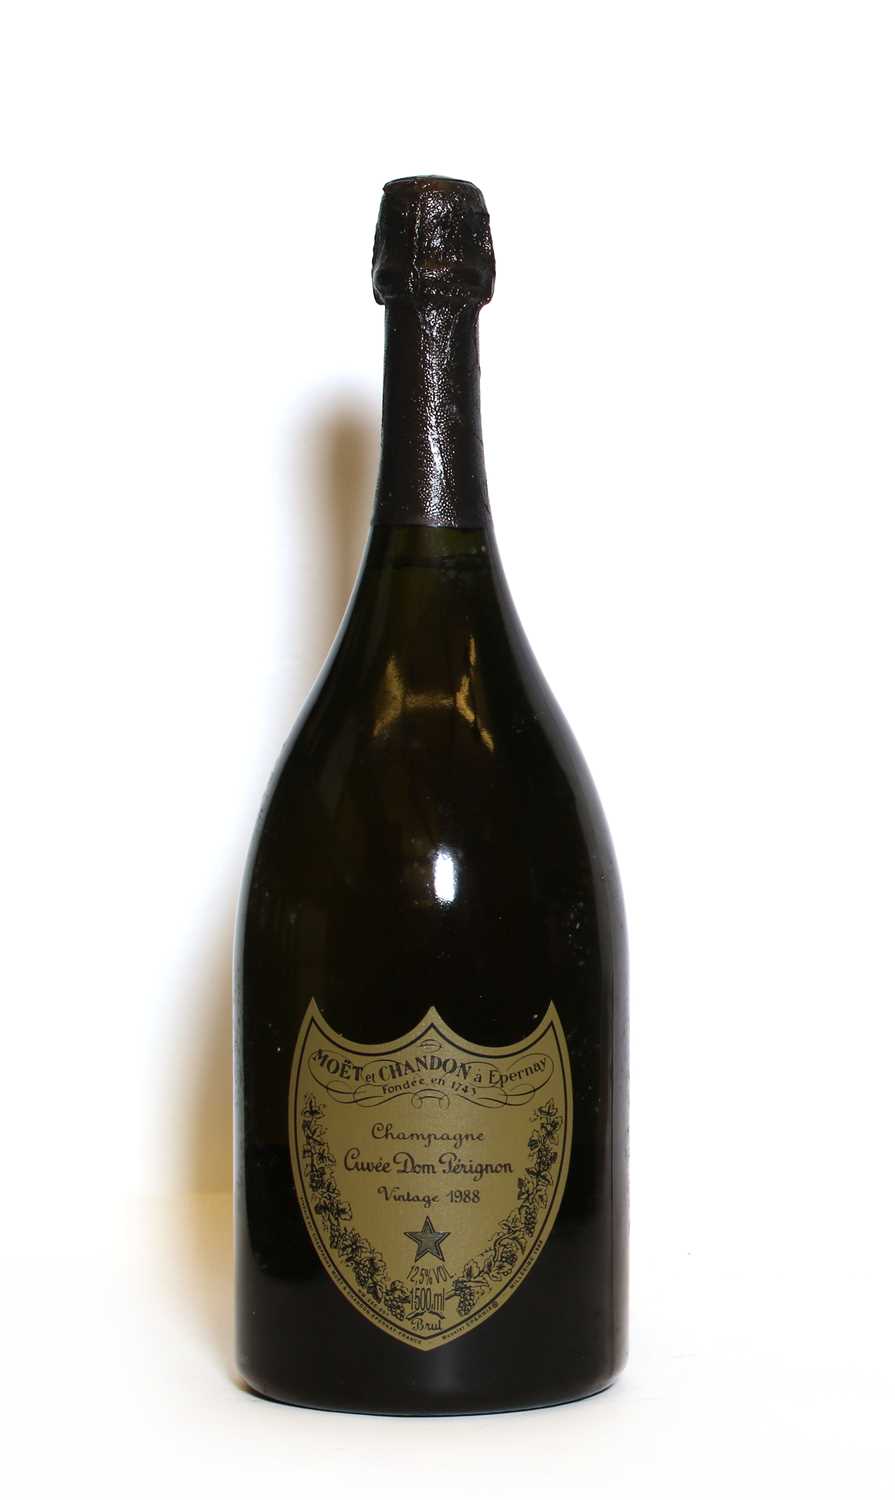 Lot 9 - Dom Perignon, Epernay, 1988, one magnum (boxed)